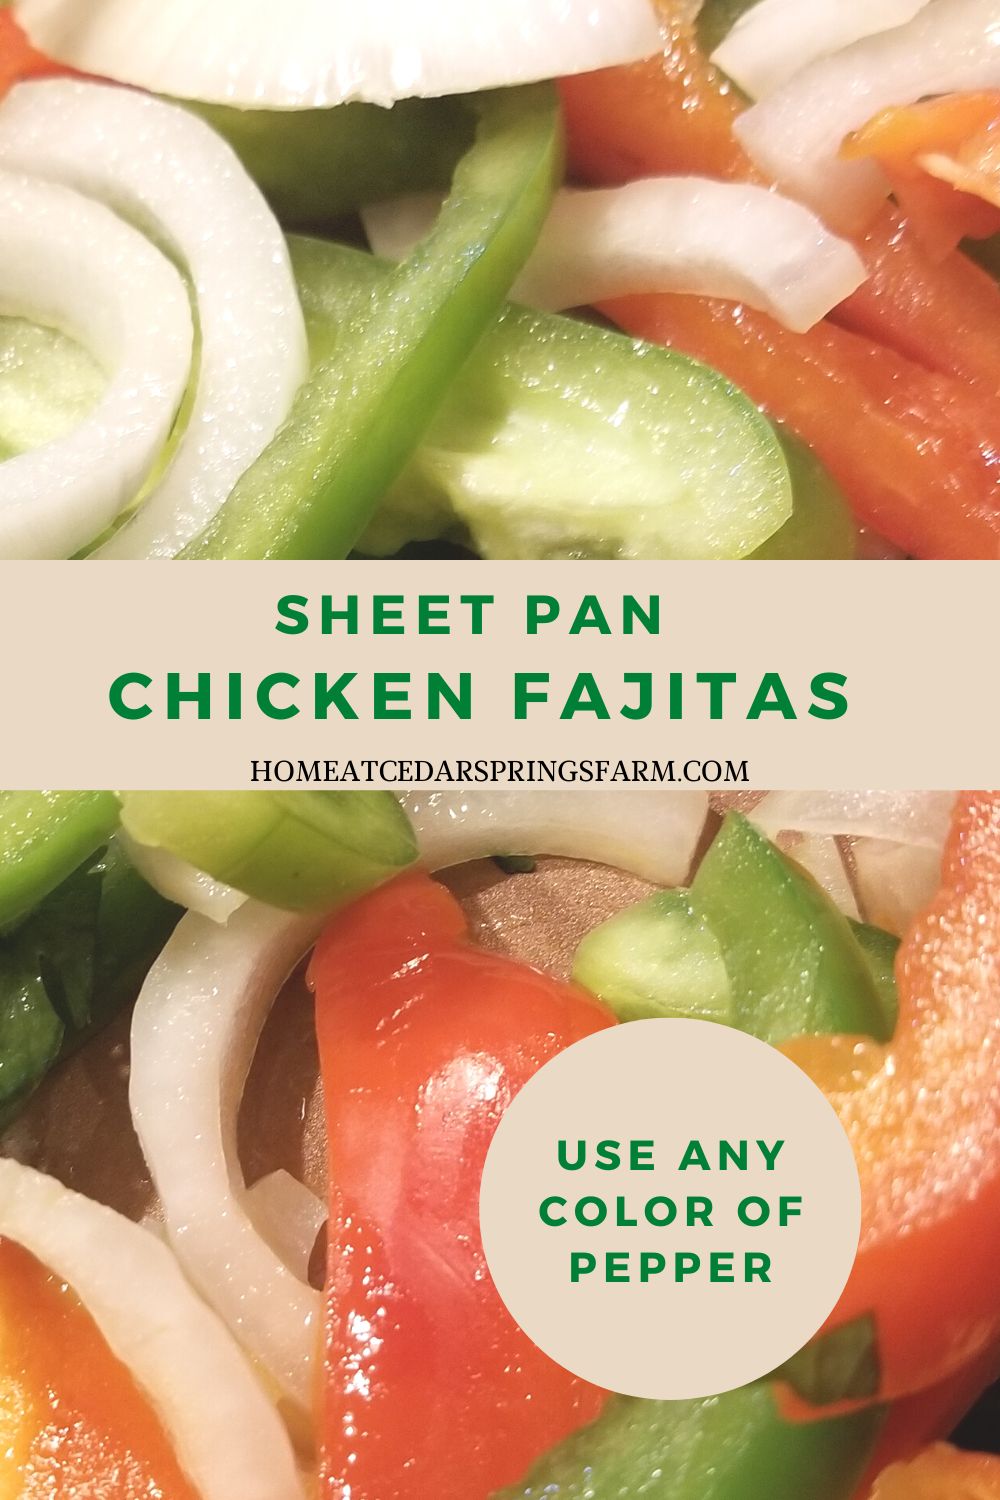 picture of sheet pan chicken fajitas with text overlay